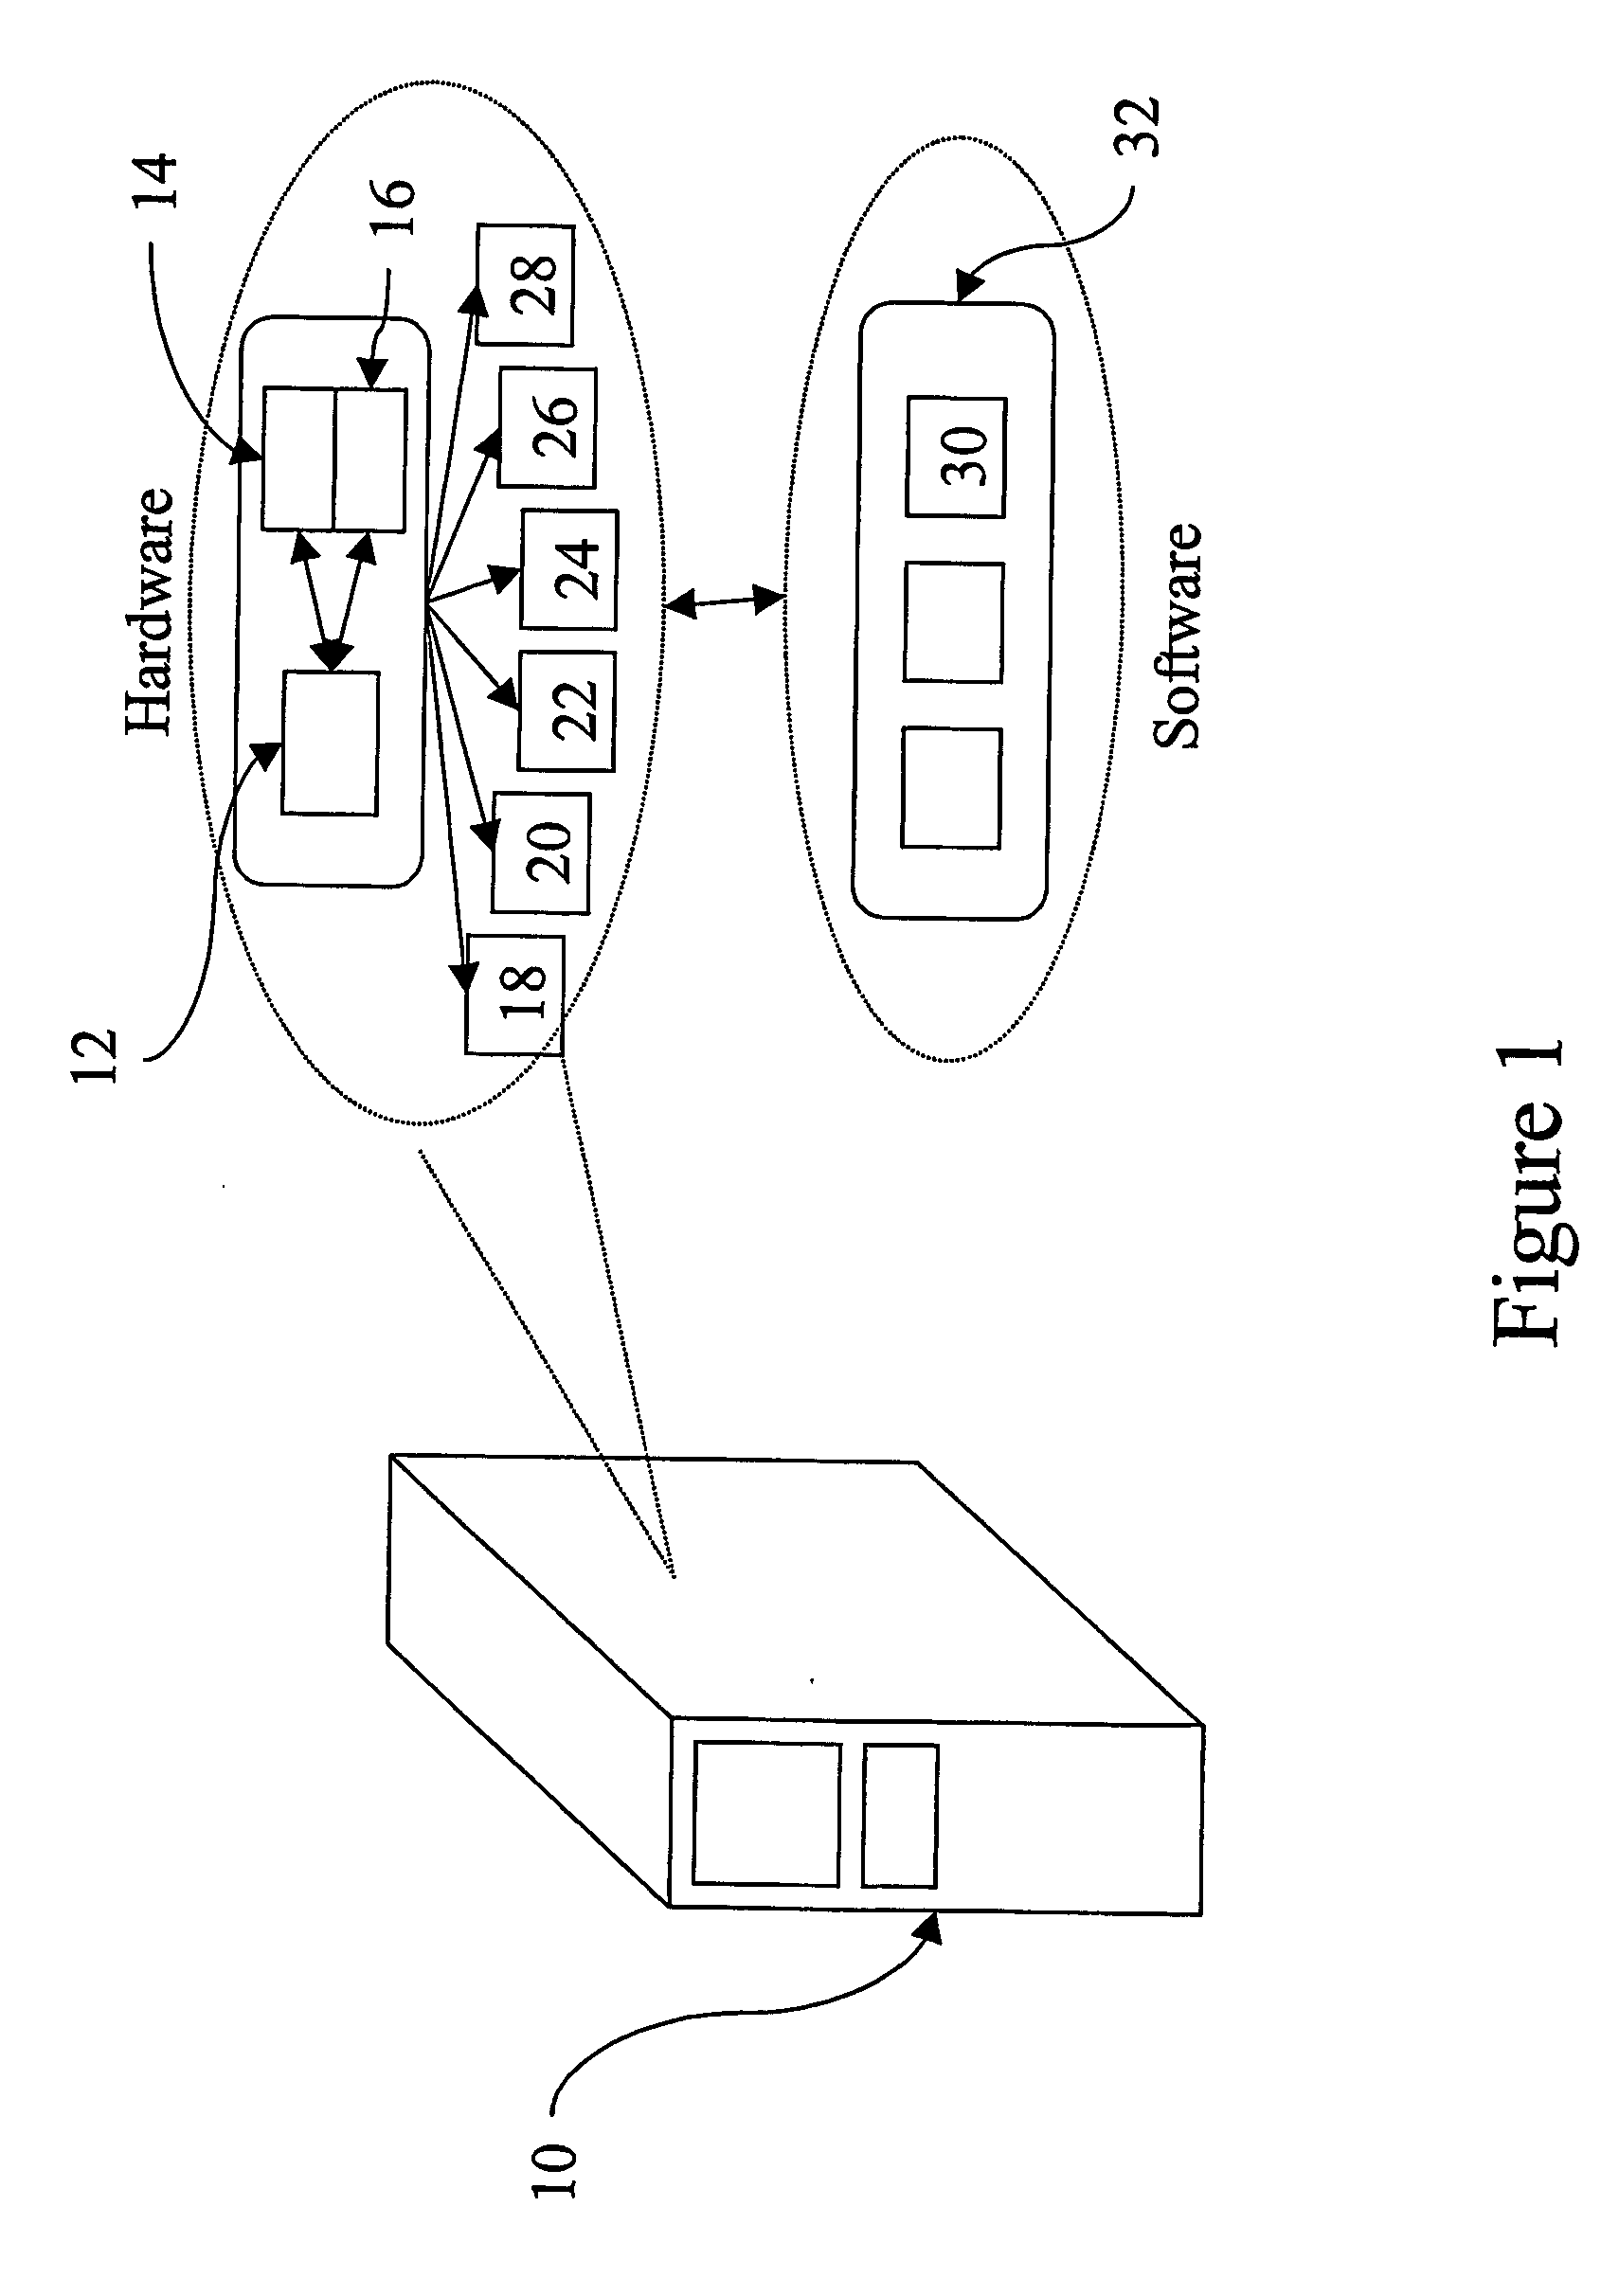 System and method for estimation of computer resource usage by transaction types